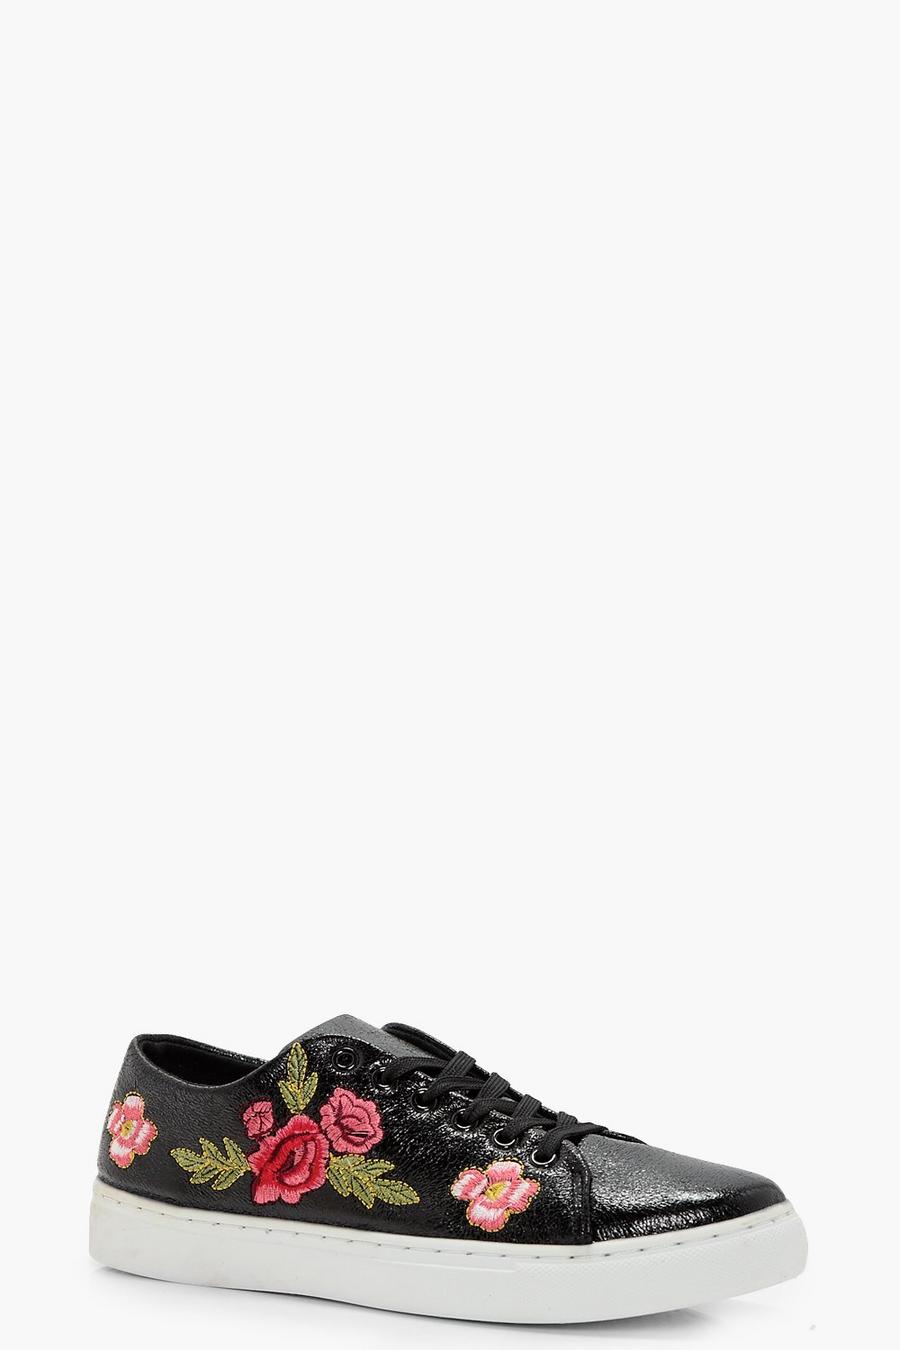 Black Lola Floral Embroidered Trainers image number 1